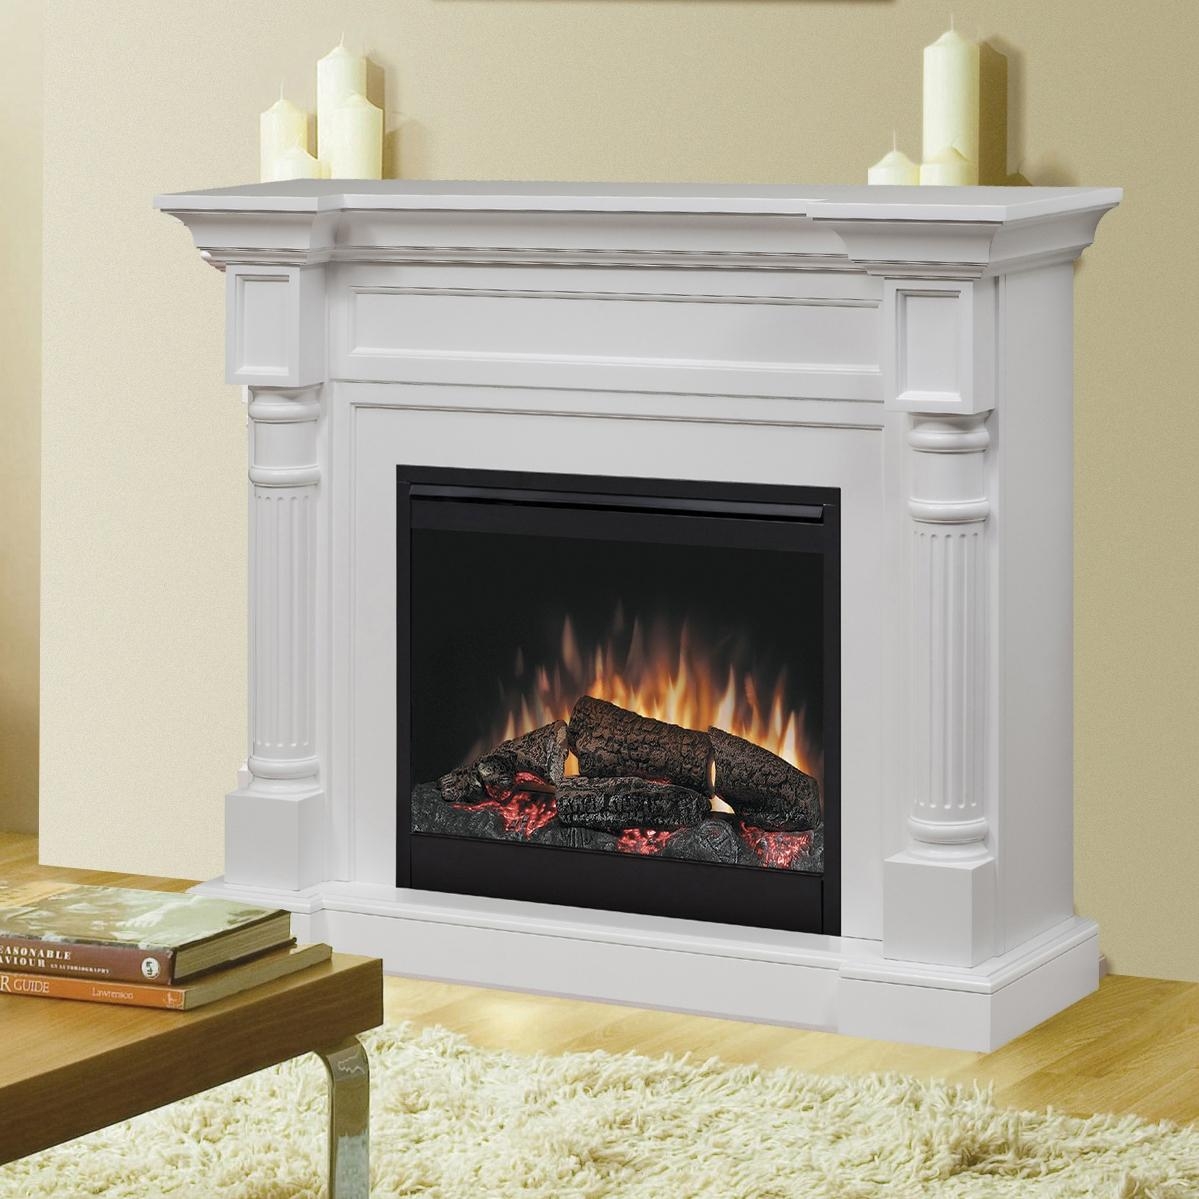 Inexpensive Electric Fireplaces Beautiful 62 Electric Fireplace Charming Fireplace